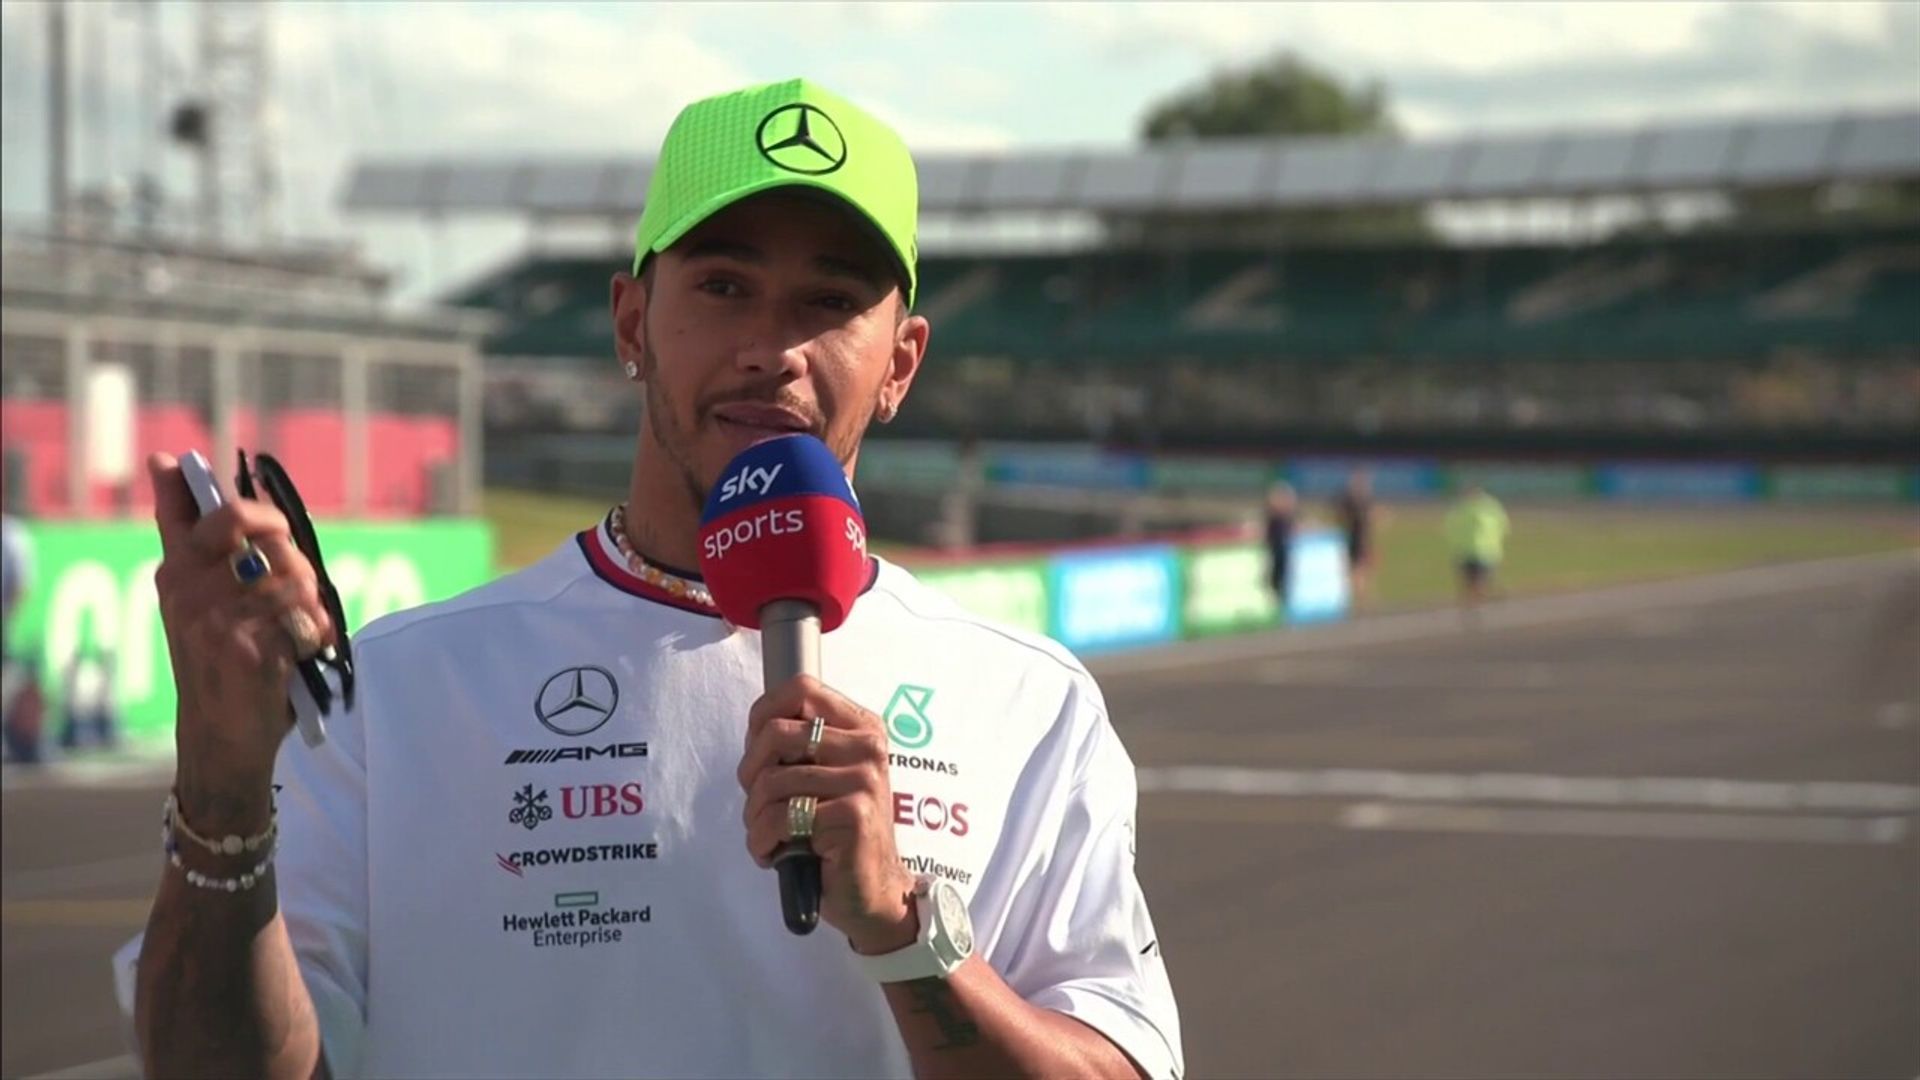 'How much longer will we see Lewis in F1?' - Hamilton reveals all!